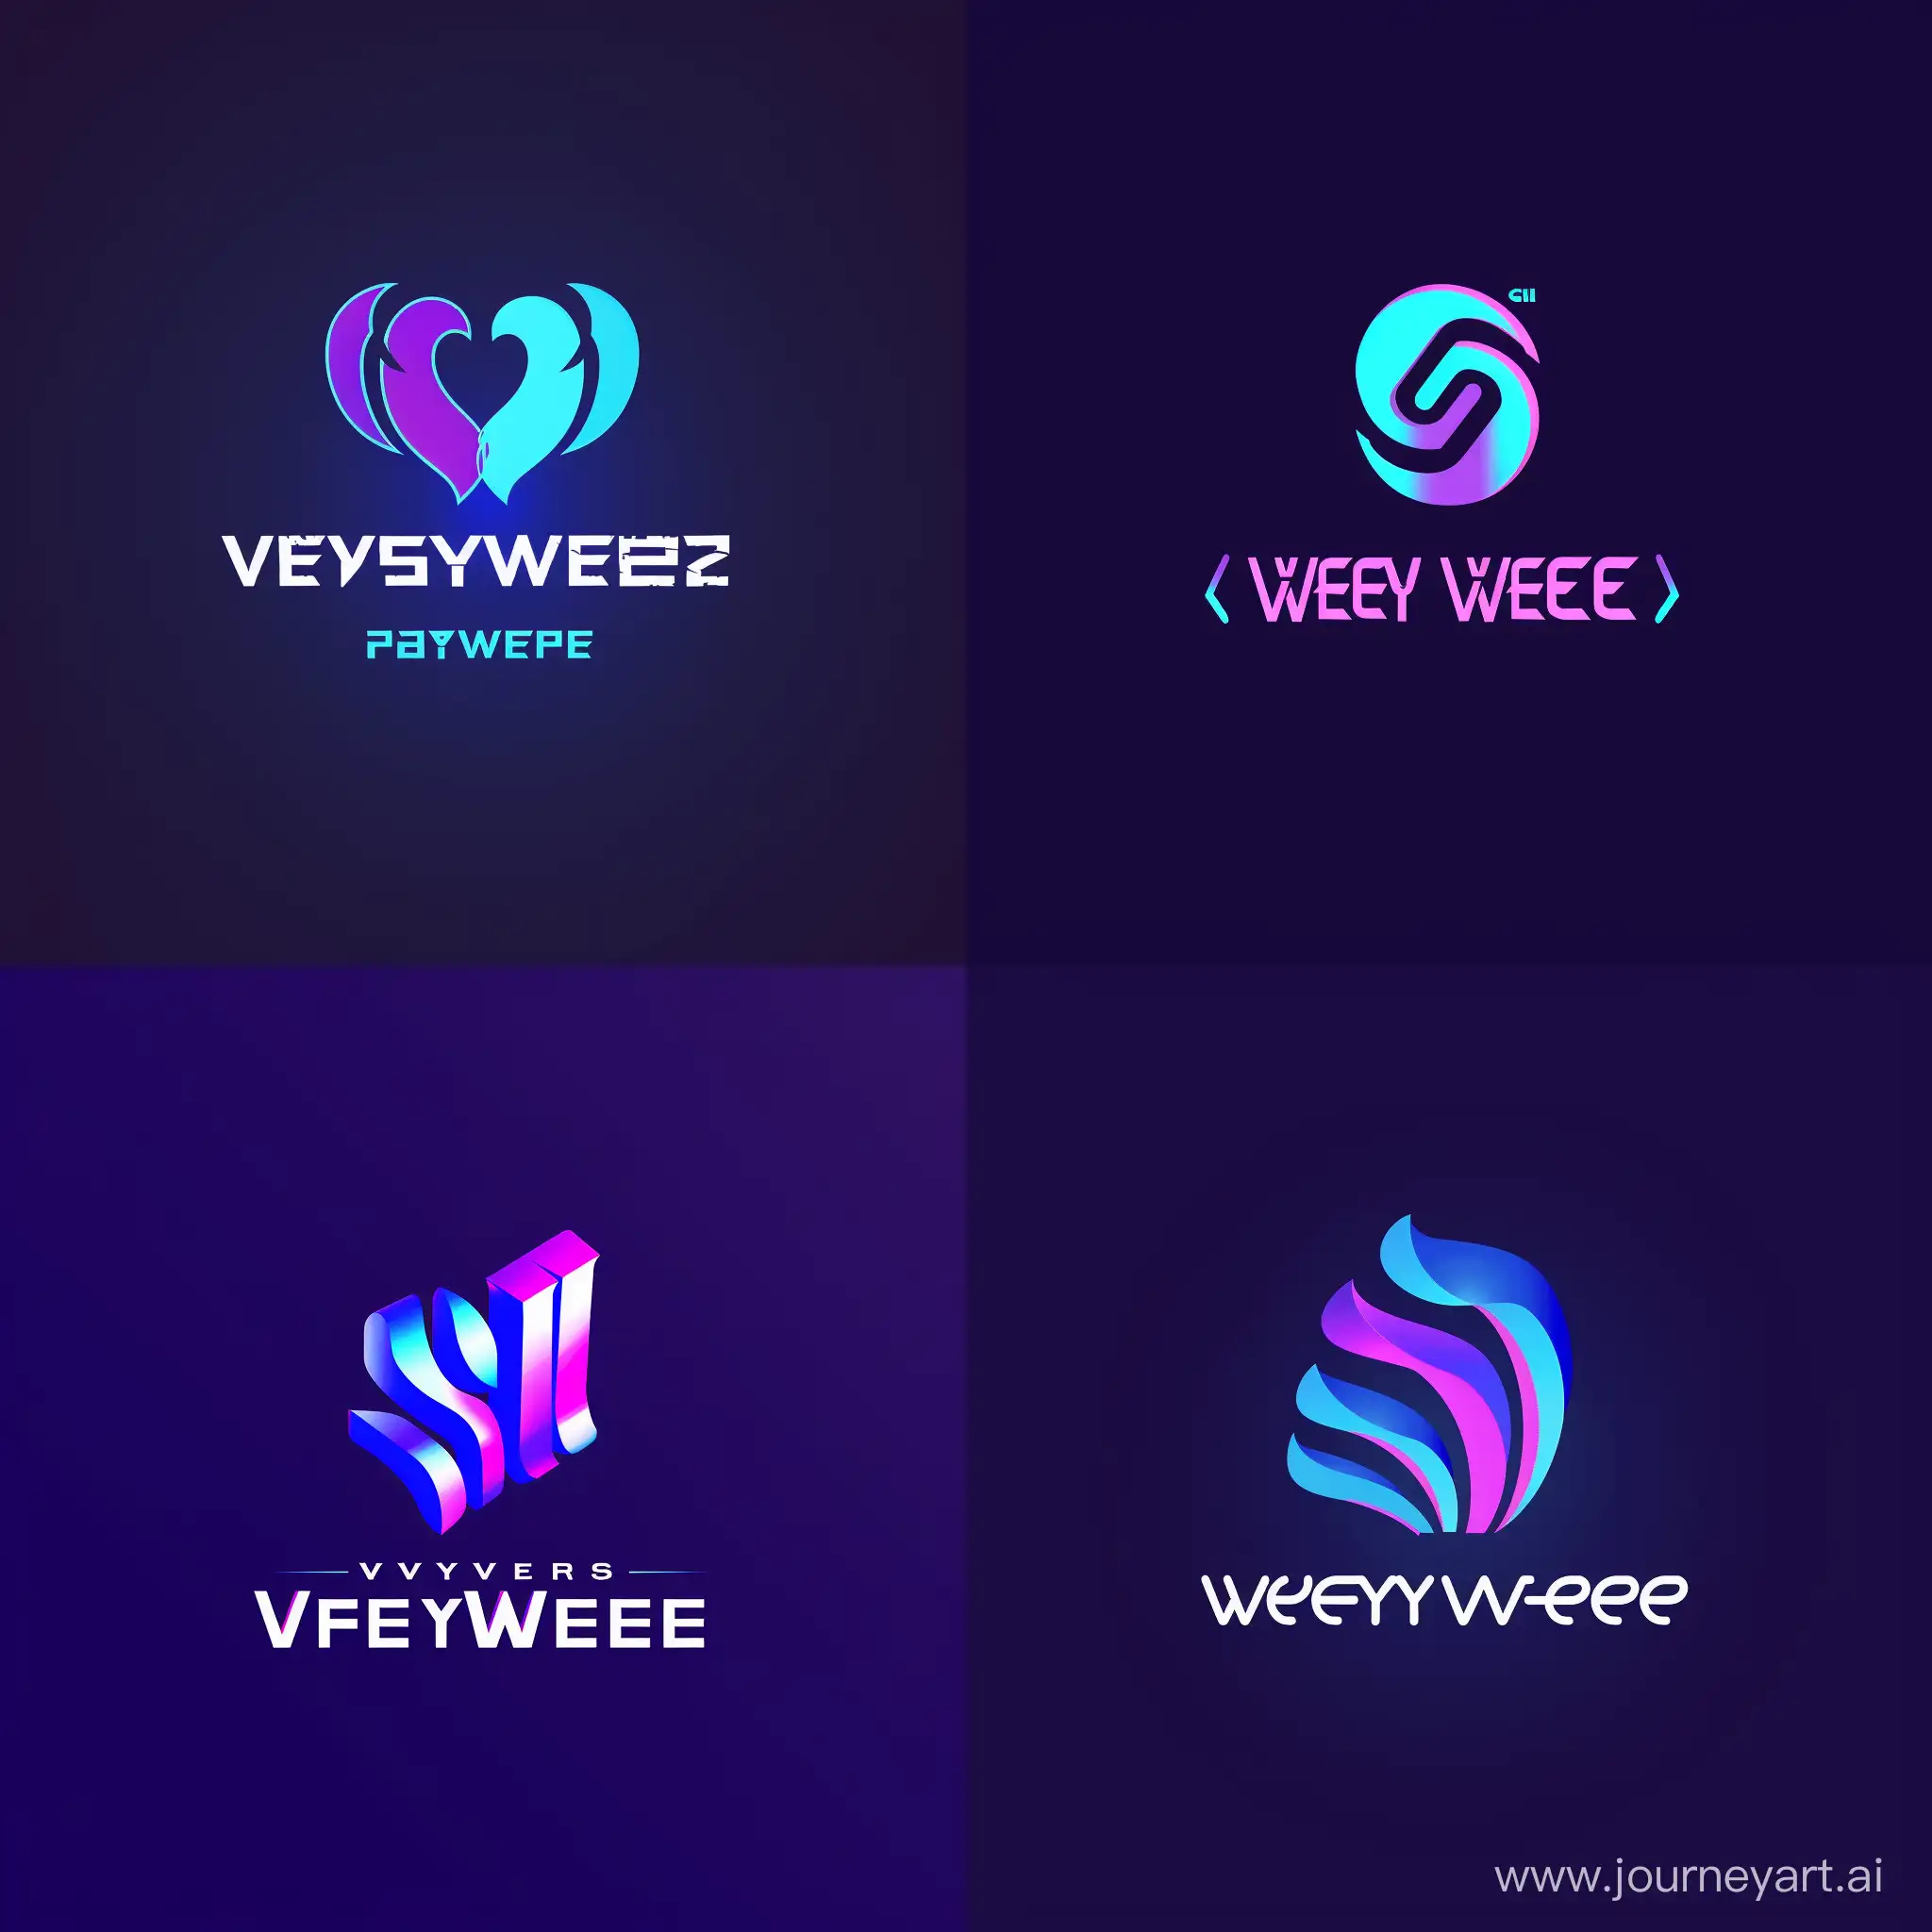 Generate a logo of games company called video verse with purple blue color palette